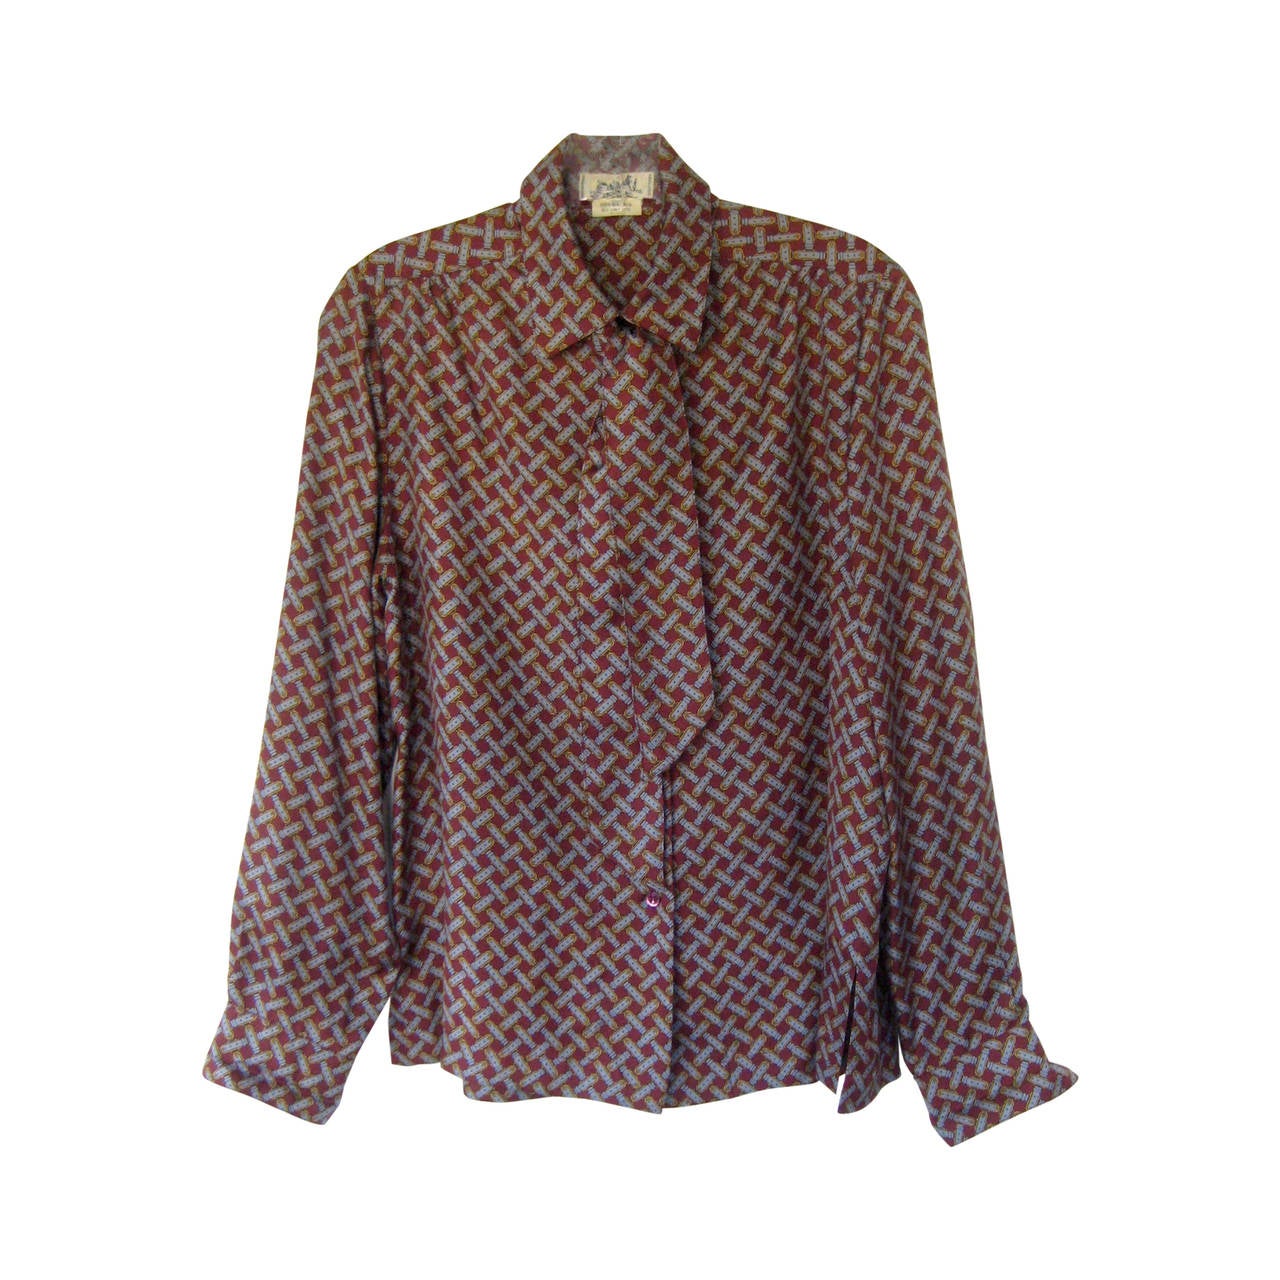 Vintage Hermes Buckle Print Blouse with Matching Twilly Tie For Sale